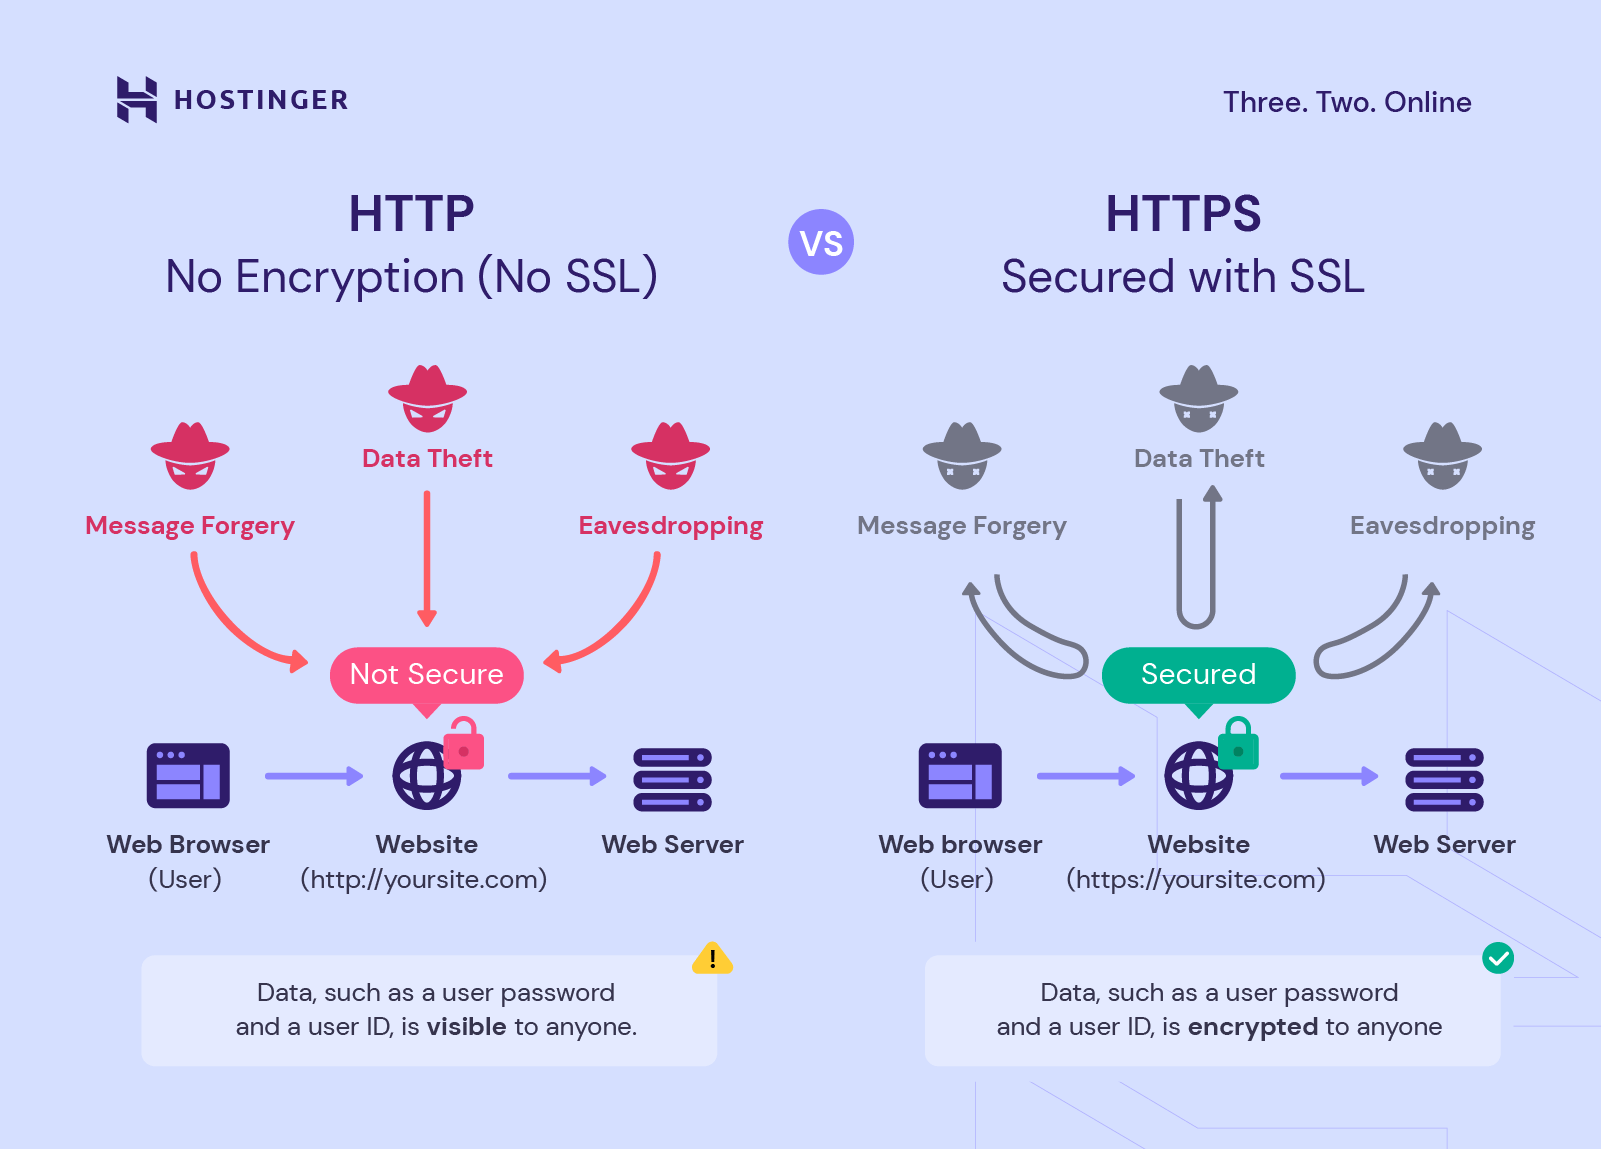 Is HTTP safe for browsing?